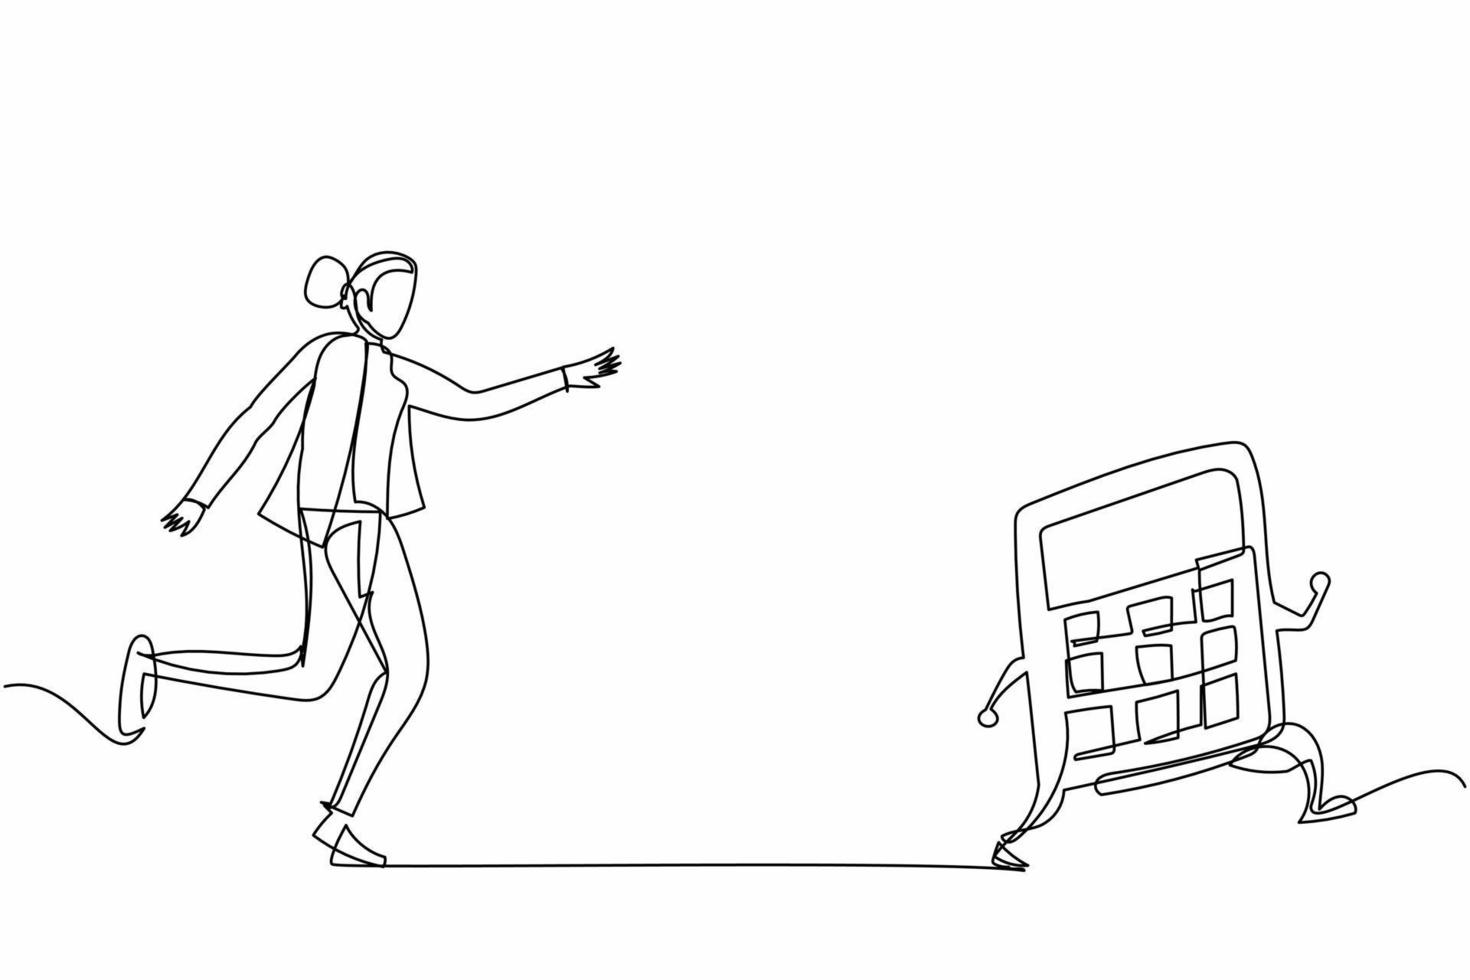 Continuous one line drawing businesswoman chasing calculator. Math operations, budget, analytics, data, income, finance. Calculations and economy. Single line draw design vector graphic illustration